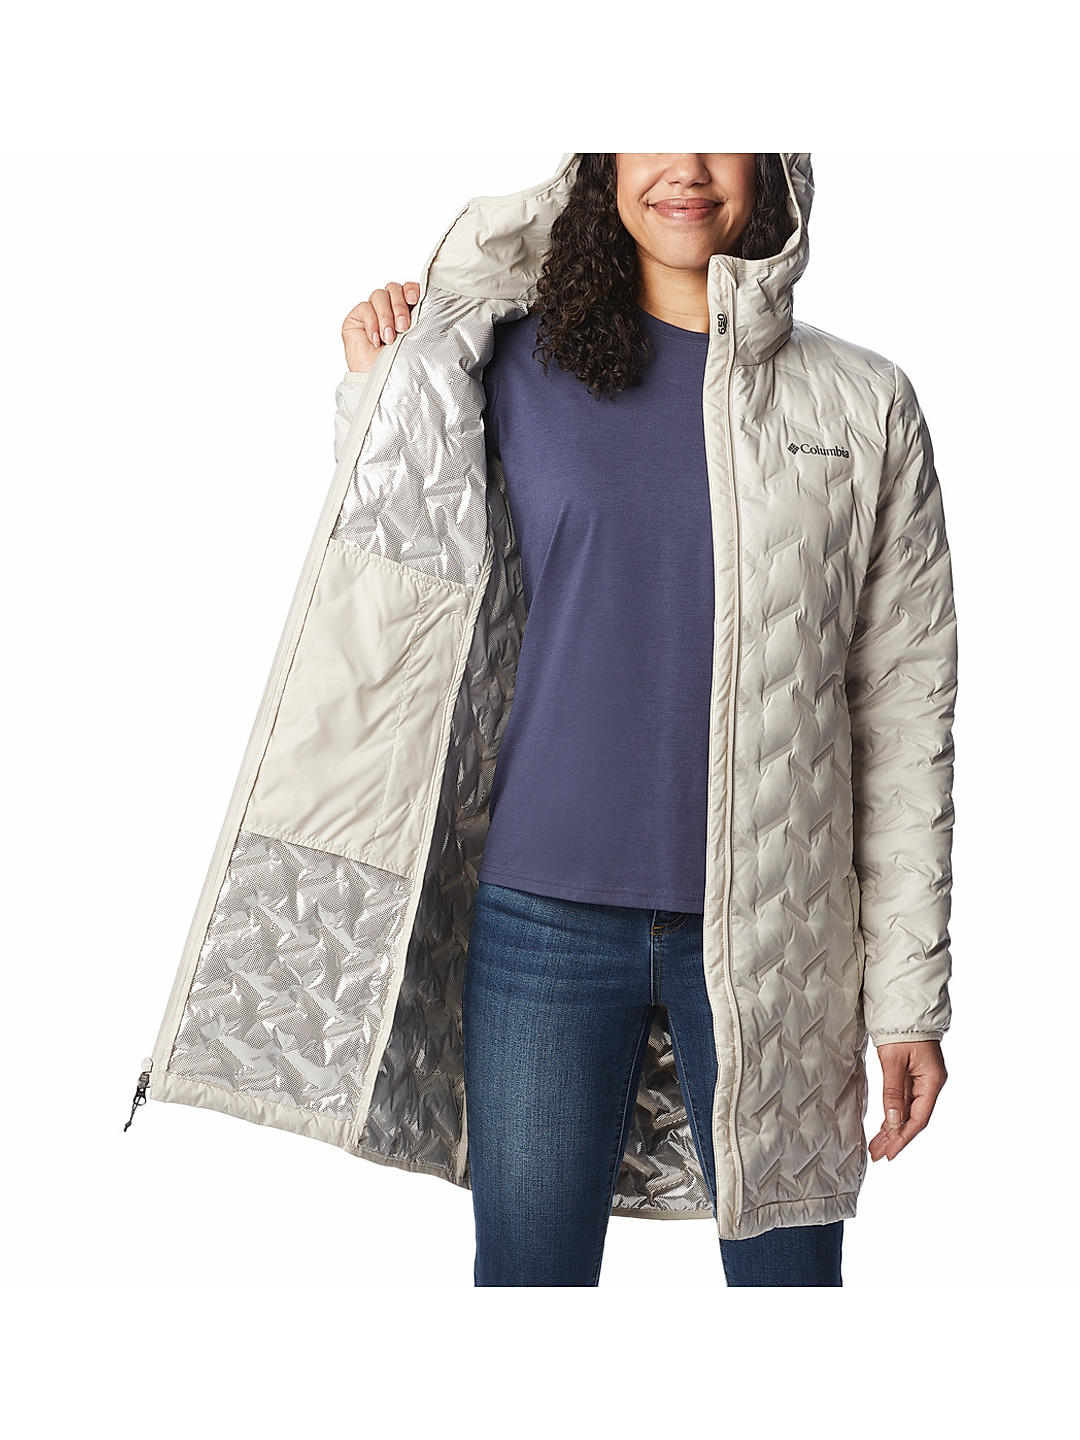 Travelers Love This Amazon Packable Puffer Jacket